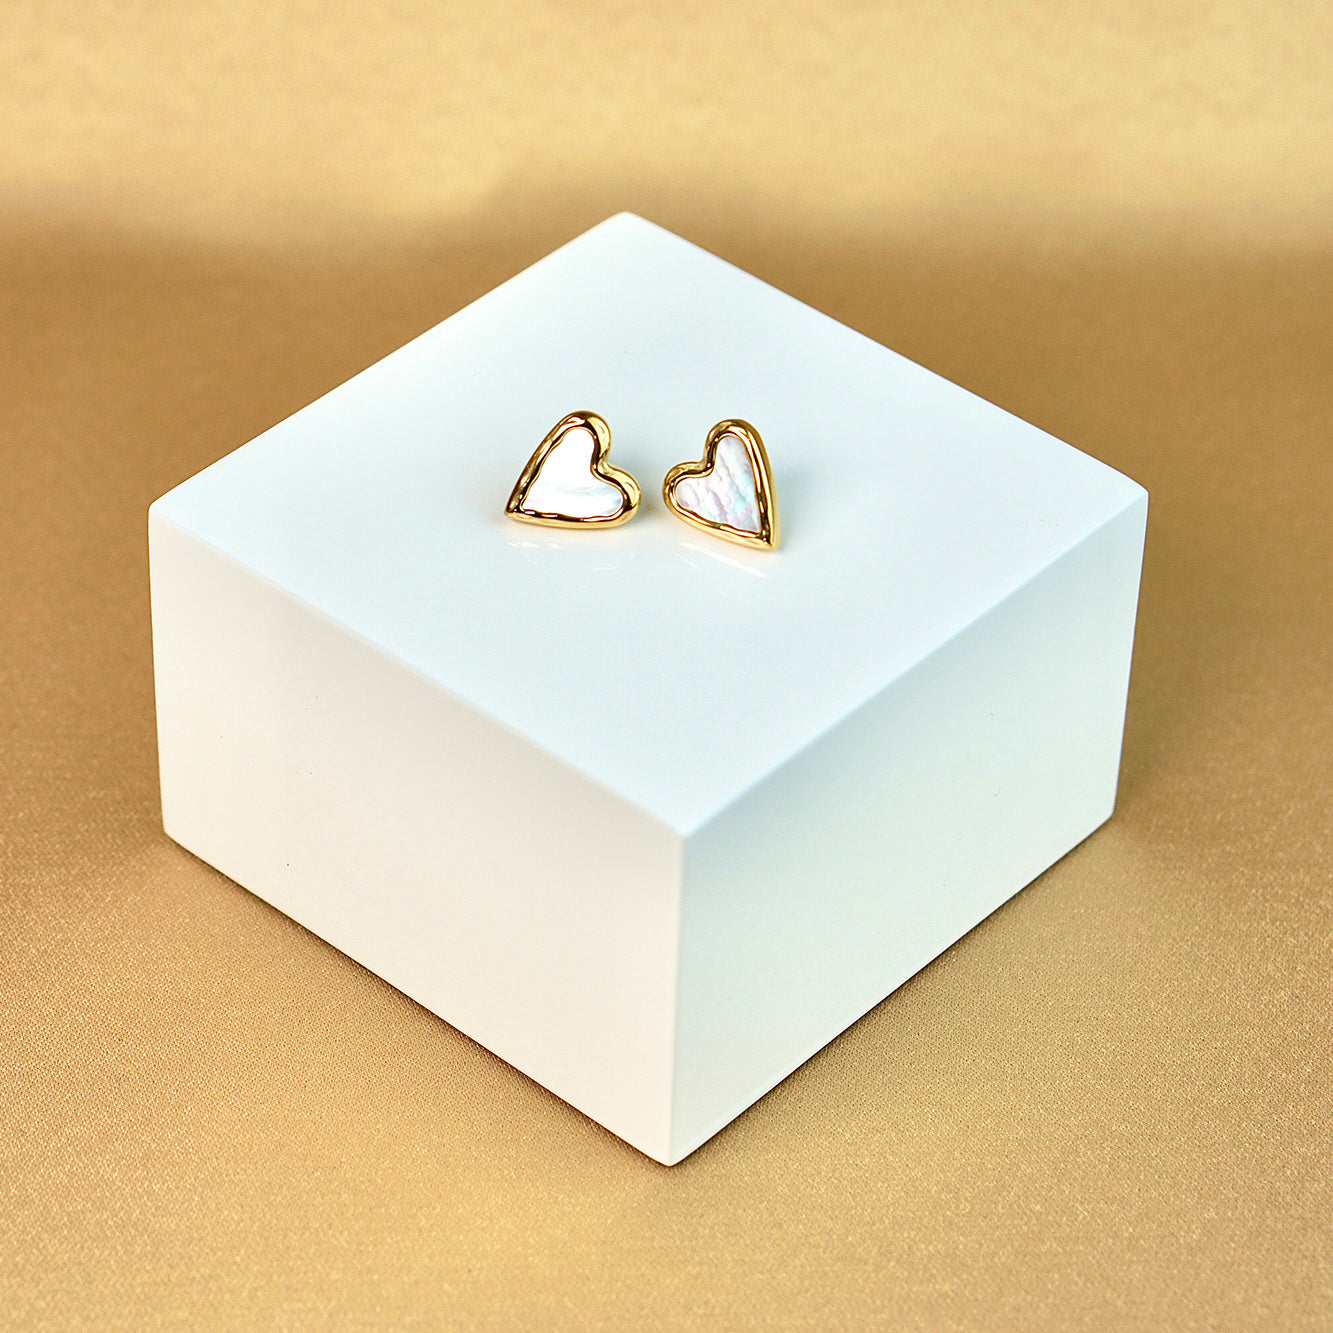 White and Gold Heart Earrings